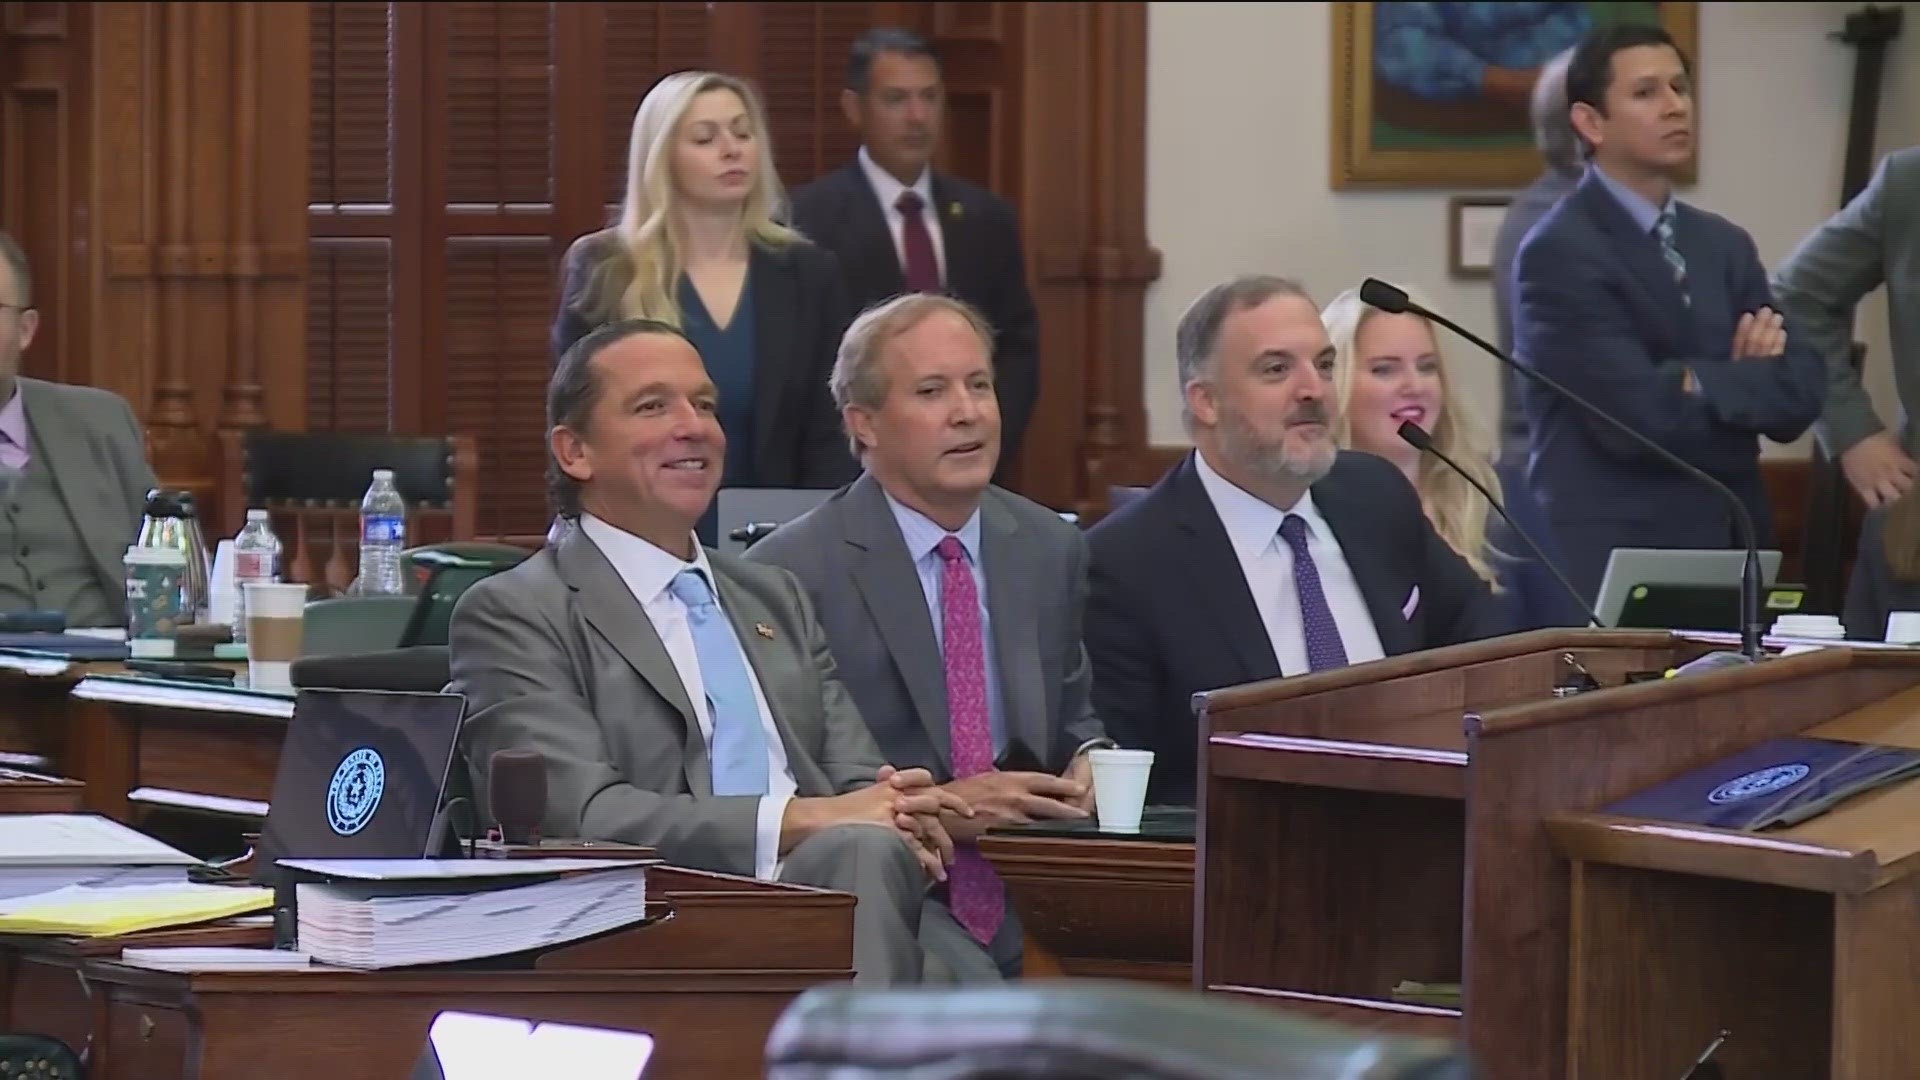 The historic impeachment trial of Texas Attorney General Ken Paxton is officially over. But some lawmakers have questions about how the process unfolded.